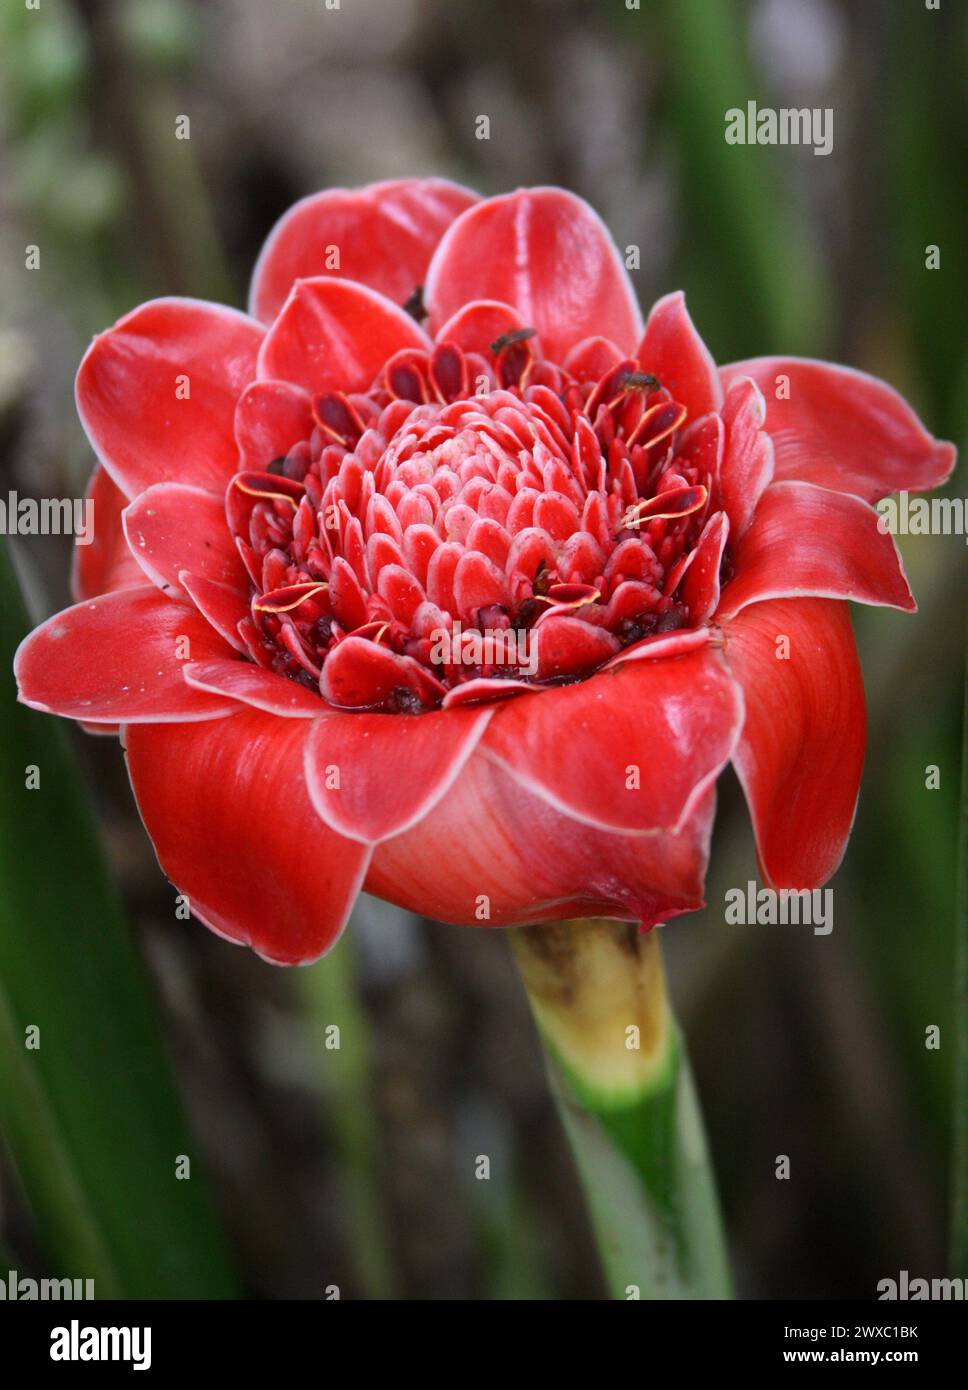 Torch Ginger, Etlingera elatior, Zingiberaceae. Costa Rica.  Also known as ginger flower, red ginger lily, torch lily, wild ginger. Stock Photo